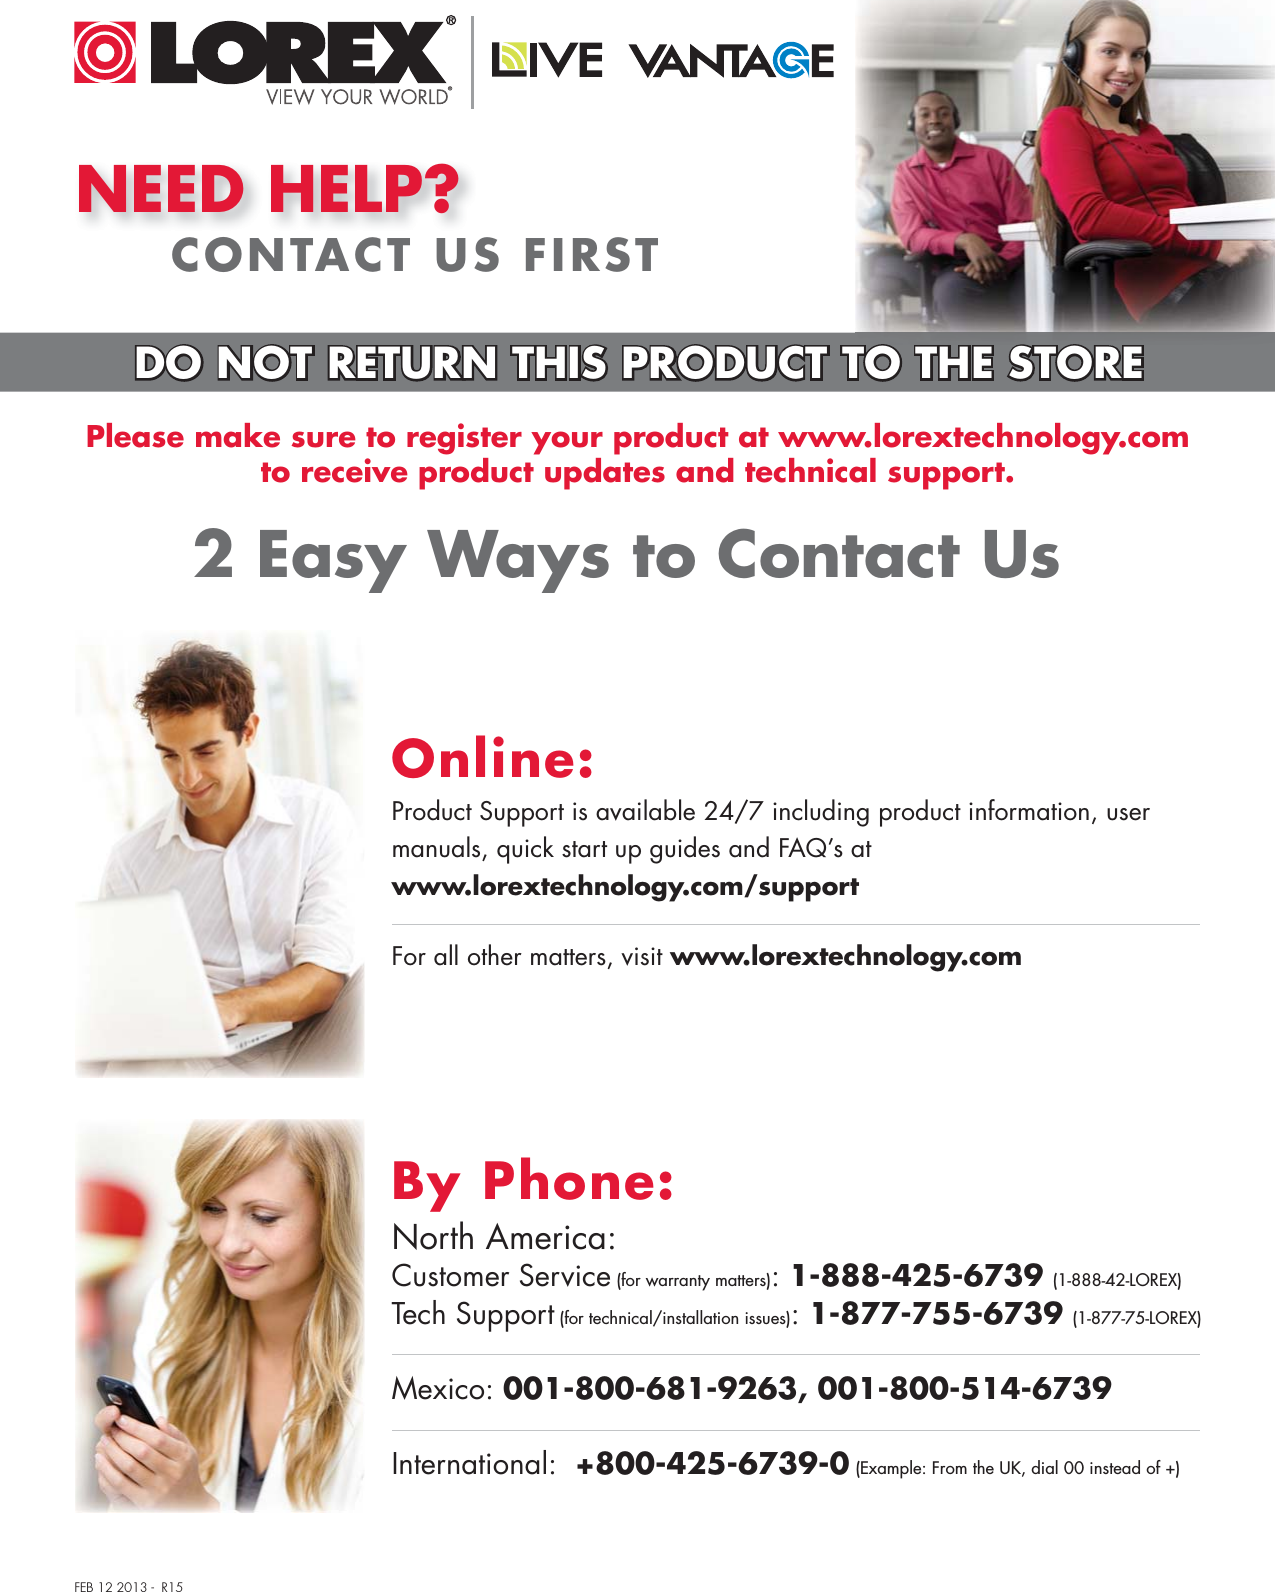 NEED HELP?CONTACT US FIRST2 Easy Ways to Contact UsPlease make sure to register your product at www.lorextechnology.comto receive product updates and technical support.DO NOT RETURN THIS PRODUCT TO THE STOREFEB 12 2013 -  R15North America:Customer Service (for warranty matters): 1-888-425-6739 (1-888-42-LOREX)Tech Support (for technical/installation issues): 1-877-755-6739 (1-877-75-LOREX)Mexico: 001-800-681-9263, 001-800-514-6739International:  +800-425-6739-0 (Example: From the UK, dial 00 instead of +)By Phone:Online:For all other matters, visit www.lorextechnology.comProduct Support is available 24/7 including product information, user manuals, quick start up guides and FAQ’s at www.lorextechnology.com/support